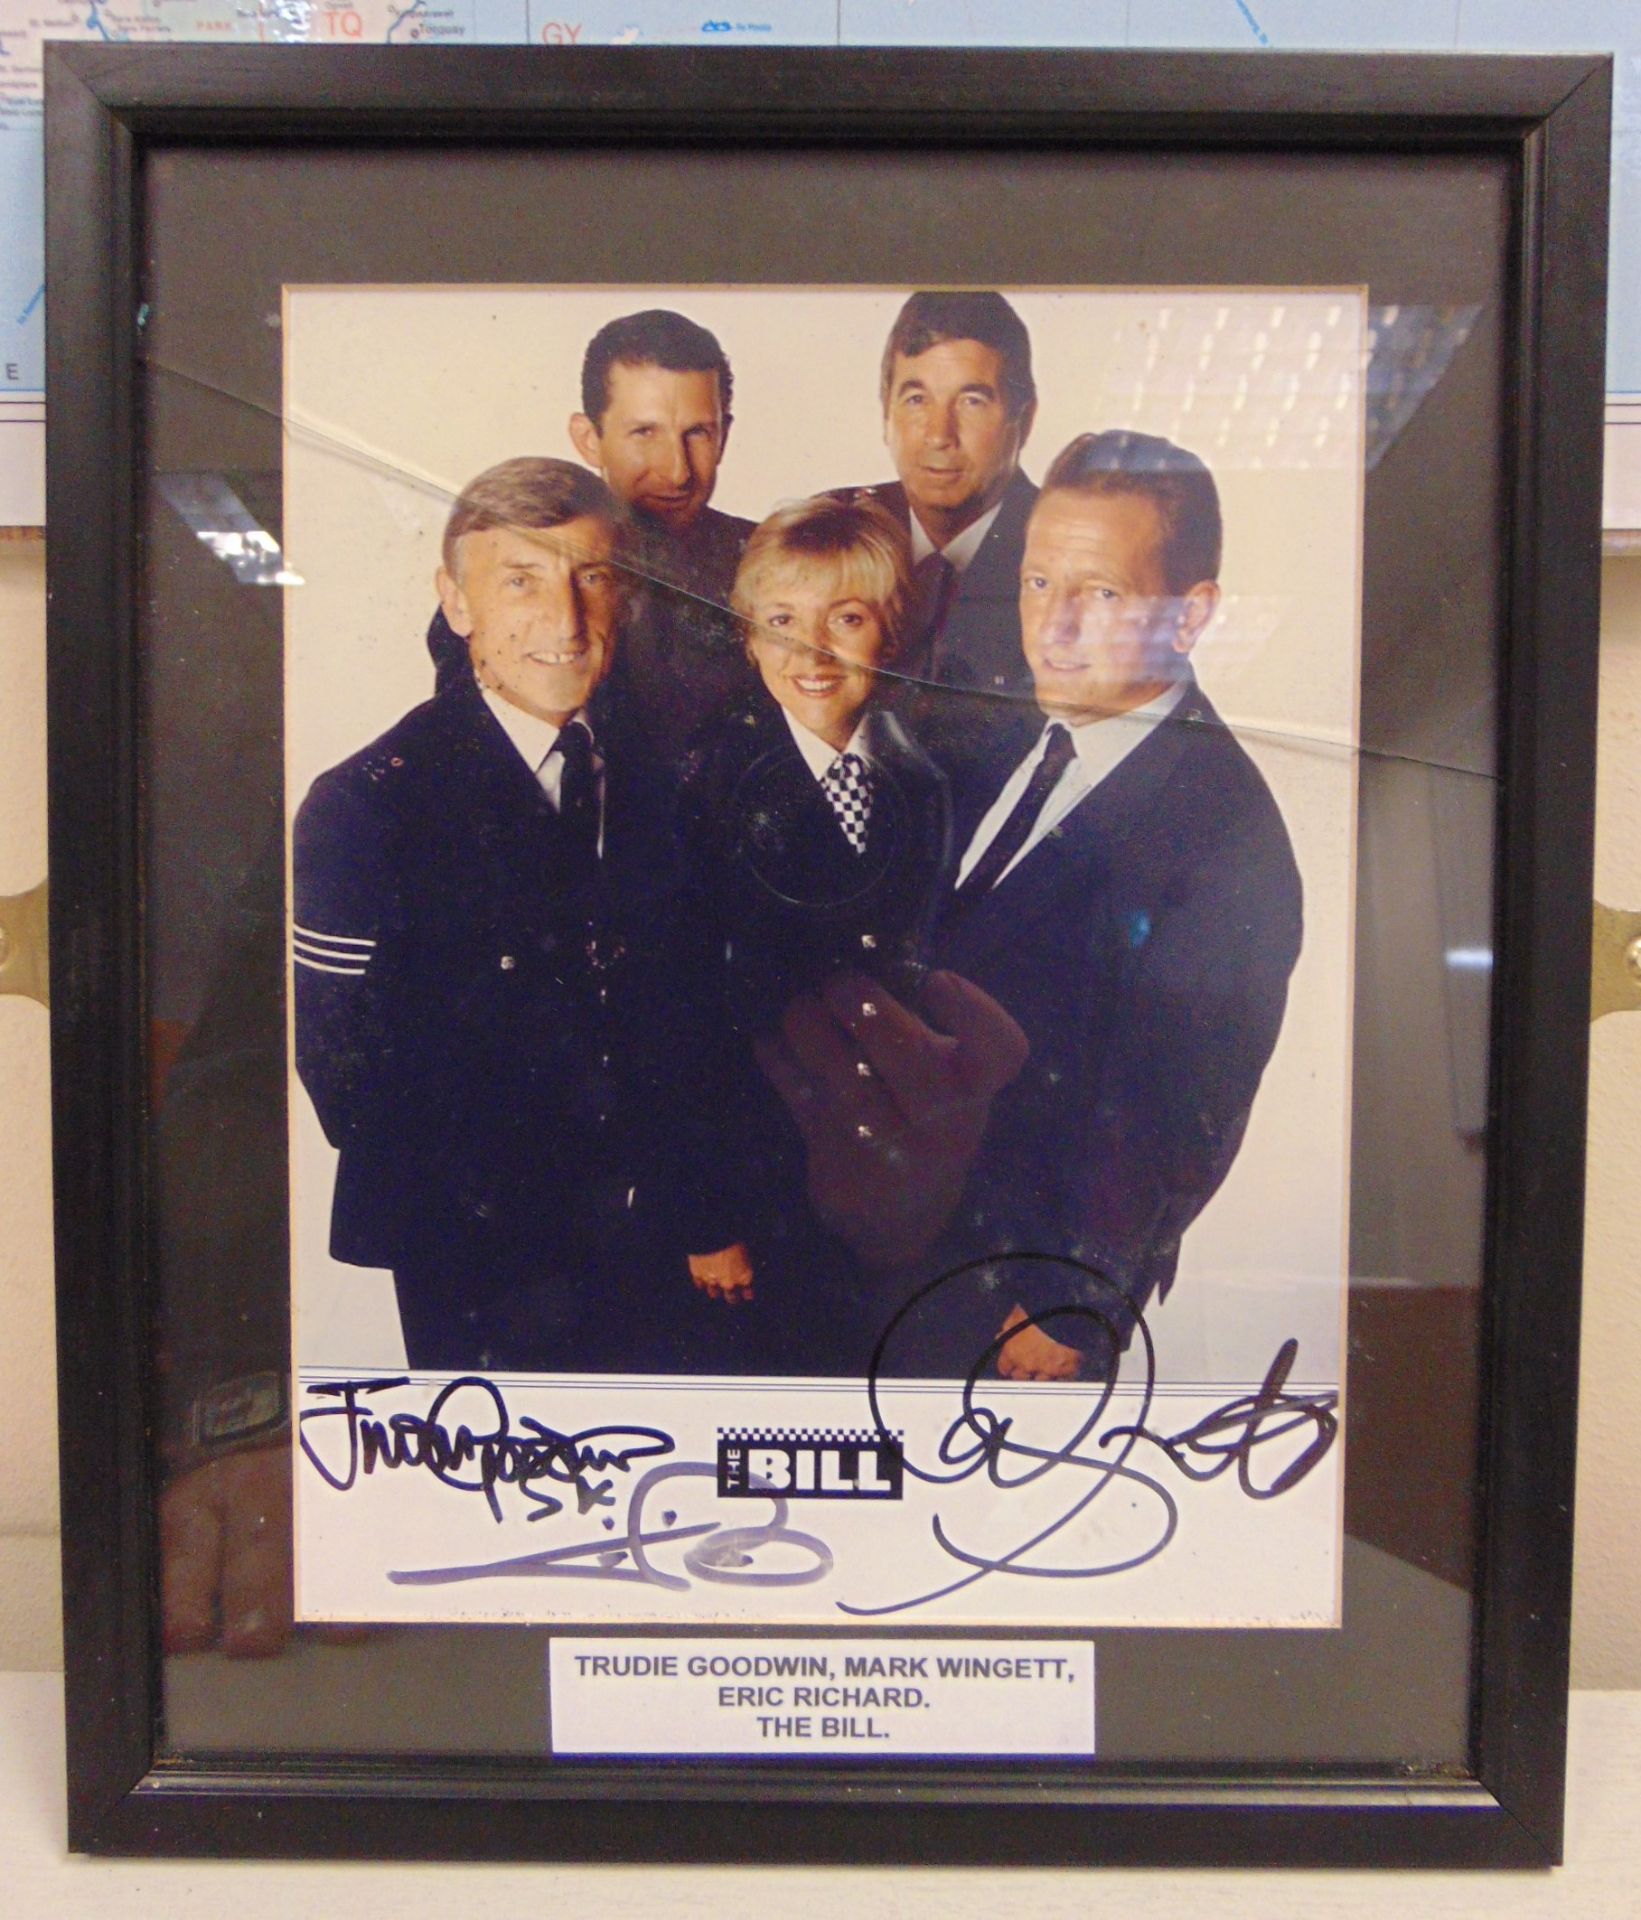 5 x Framed Photos W/ Signatures inc Depeche Mode, Dickie Valentine ect. - Image 4 of 9